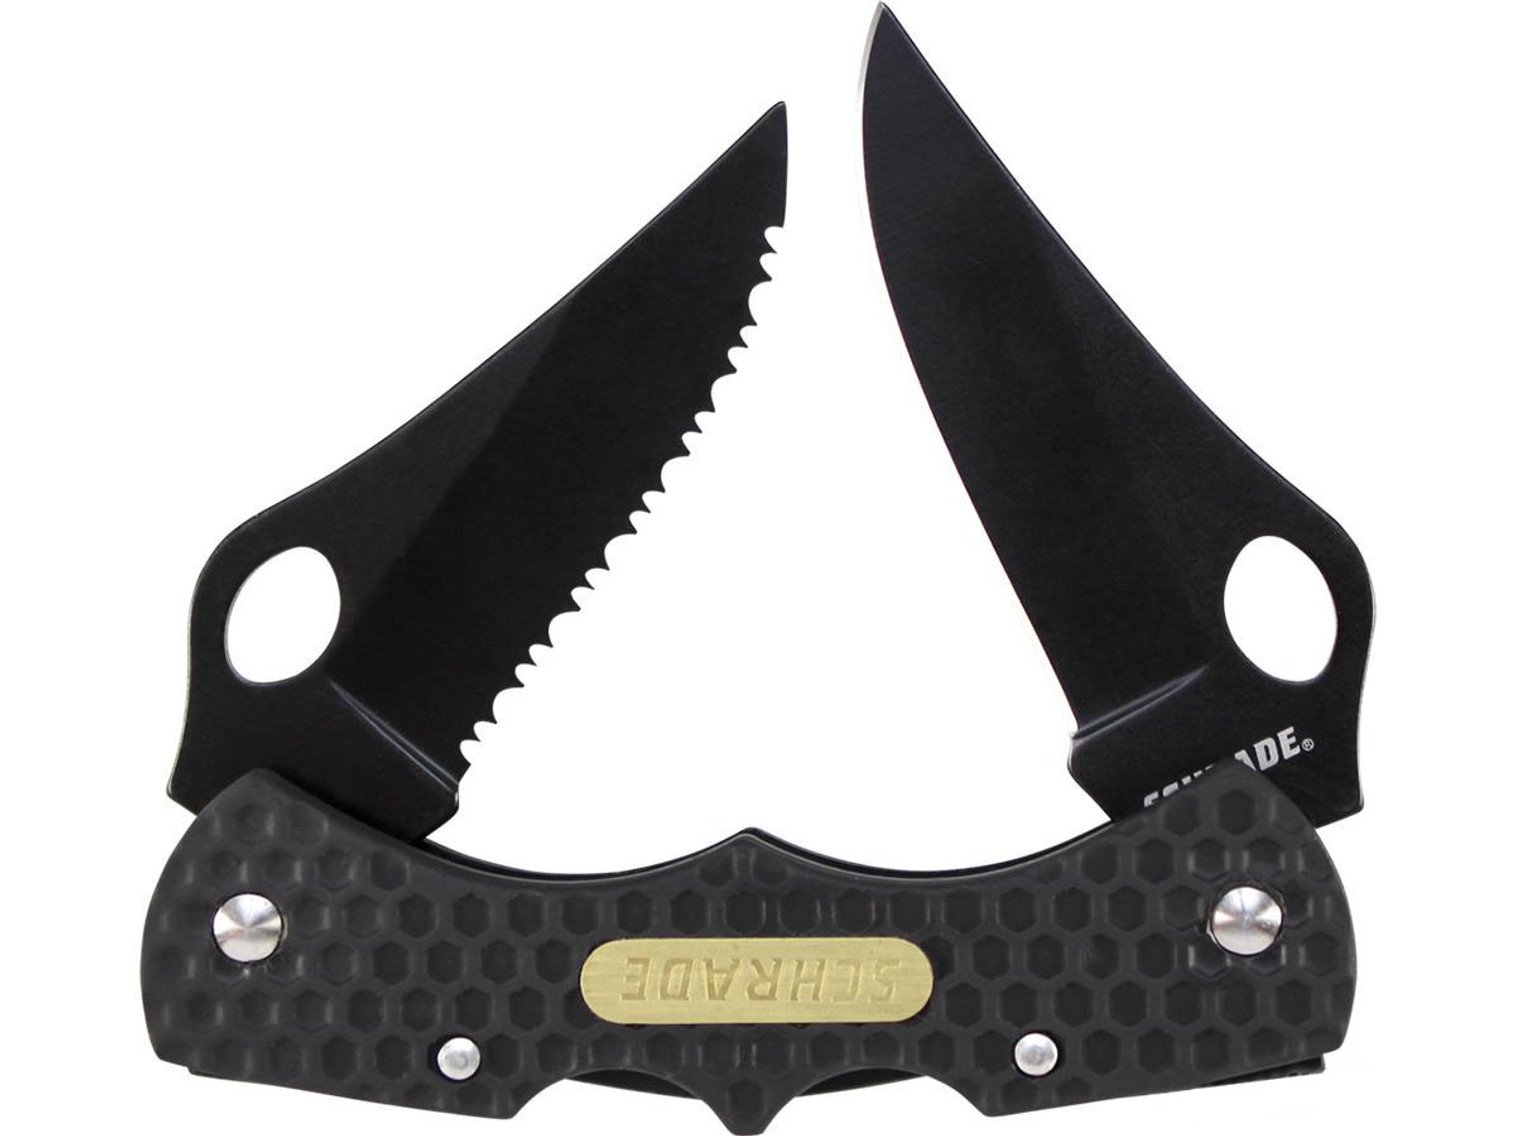 Schrade Large Double Lockback Pocket Knife with Serrated and Plain Blades